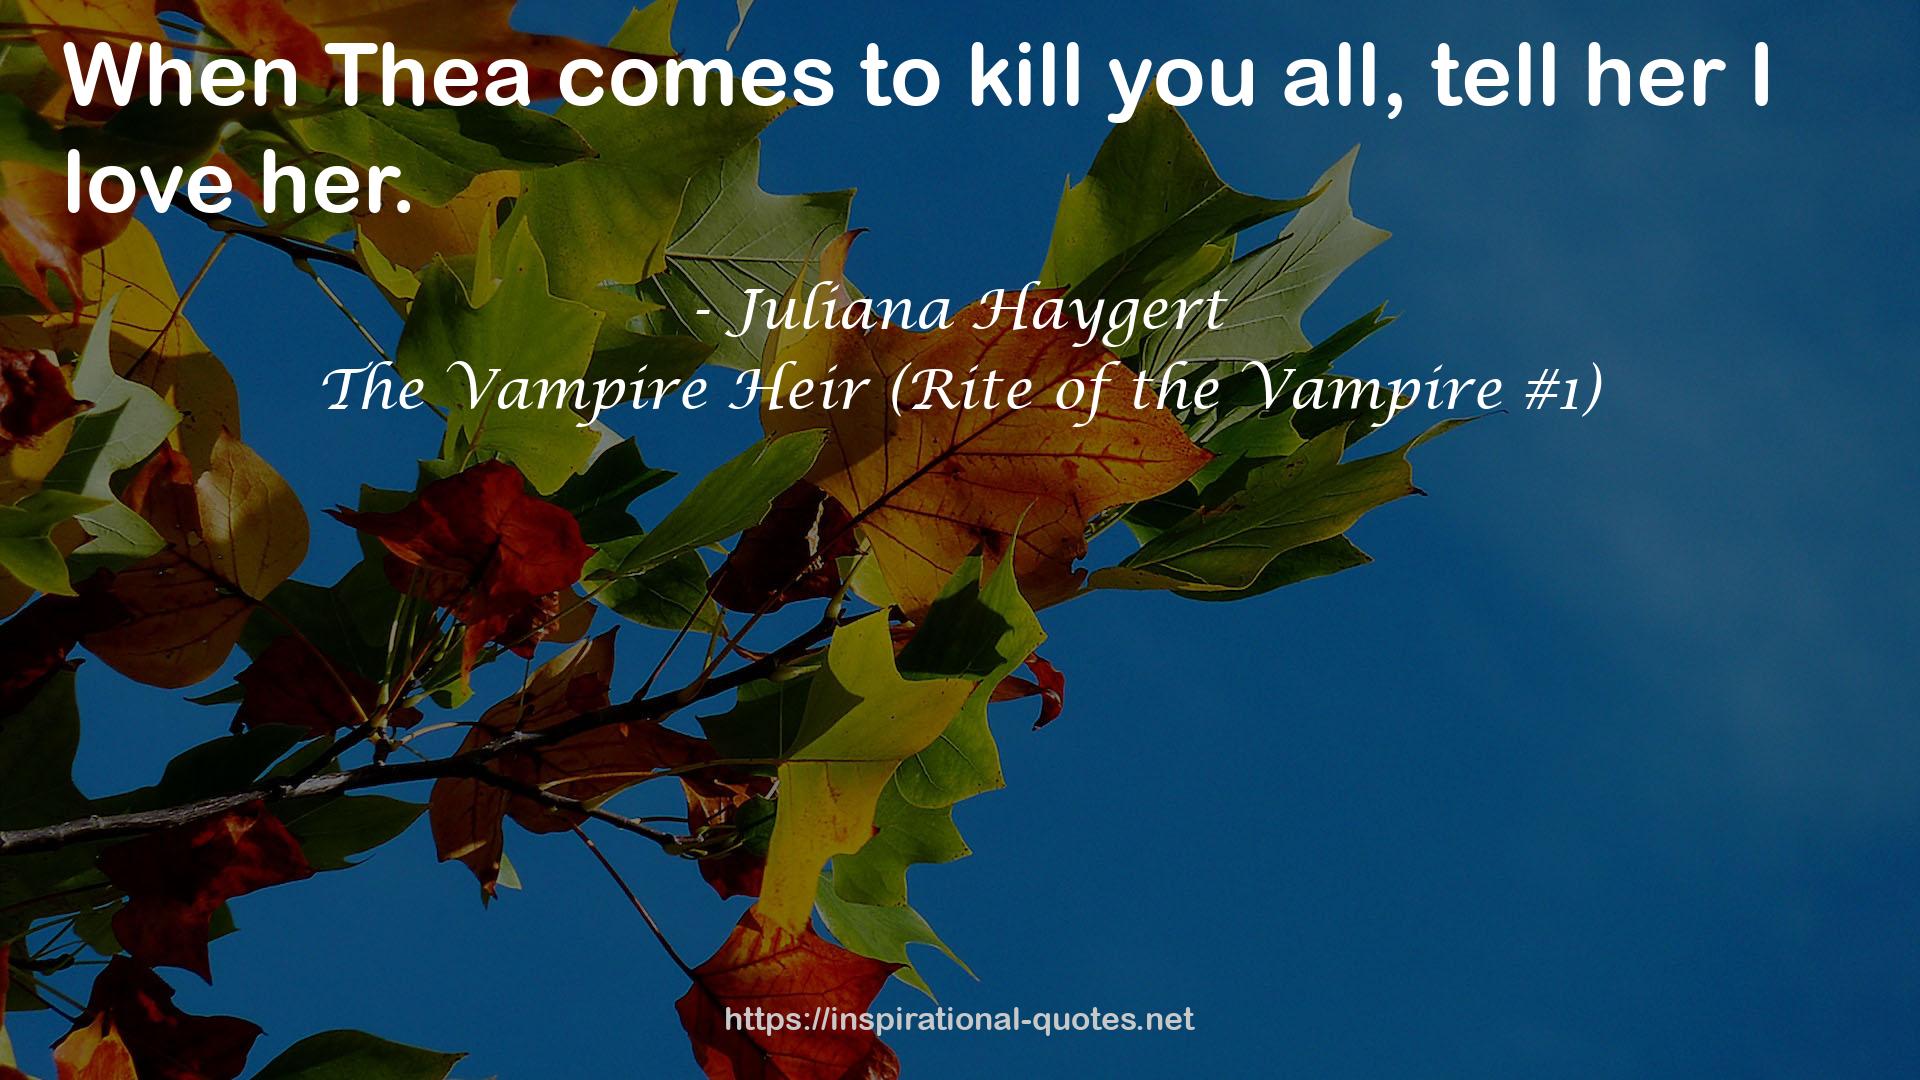 The Vampire Heir (Rite of the Vampire #1) QUOTES